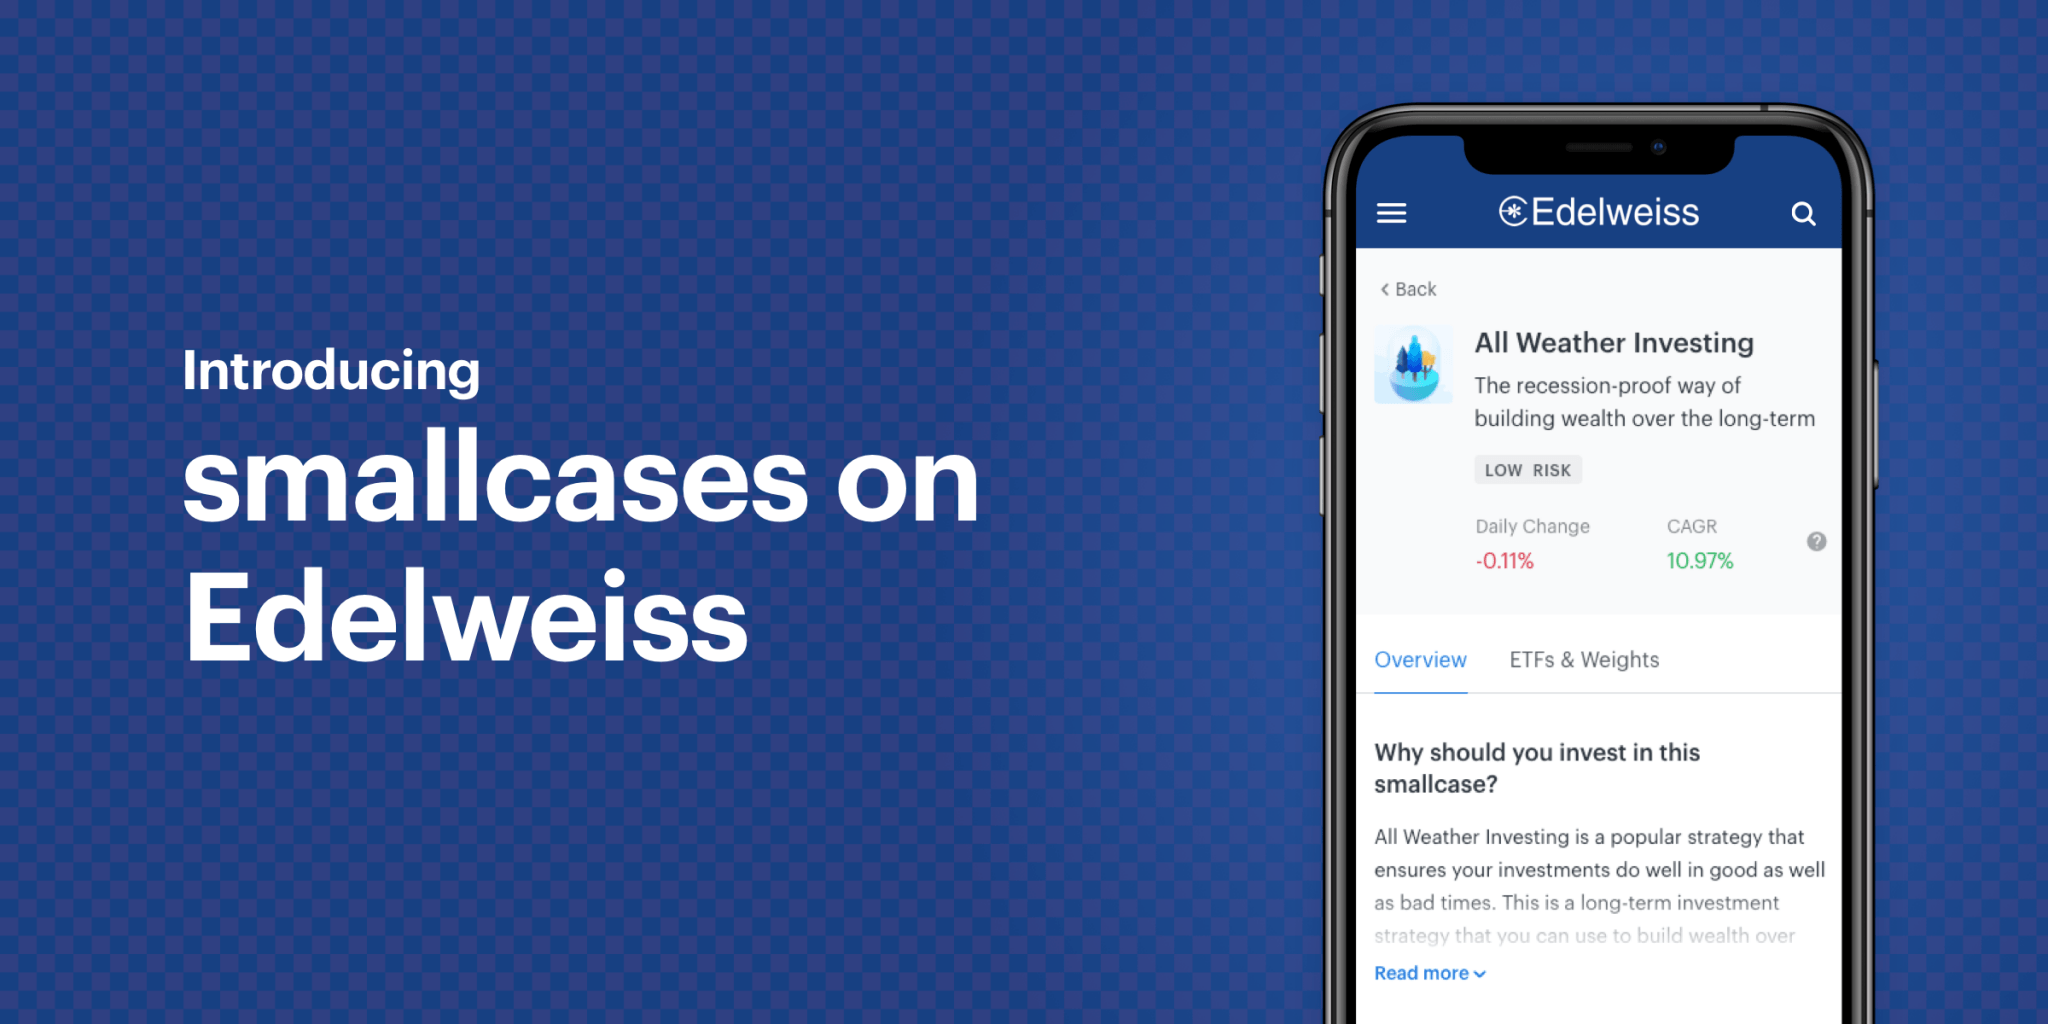 Introducing smallcases on Edelweiss